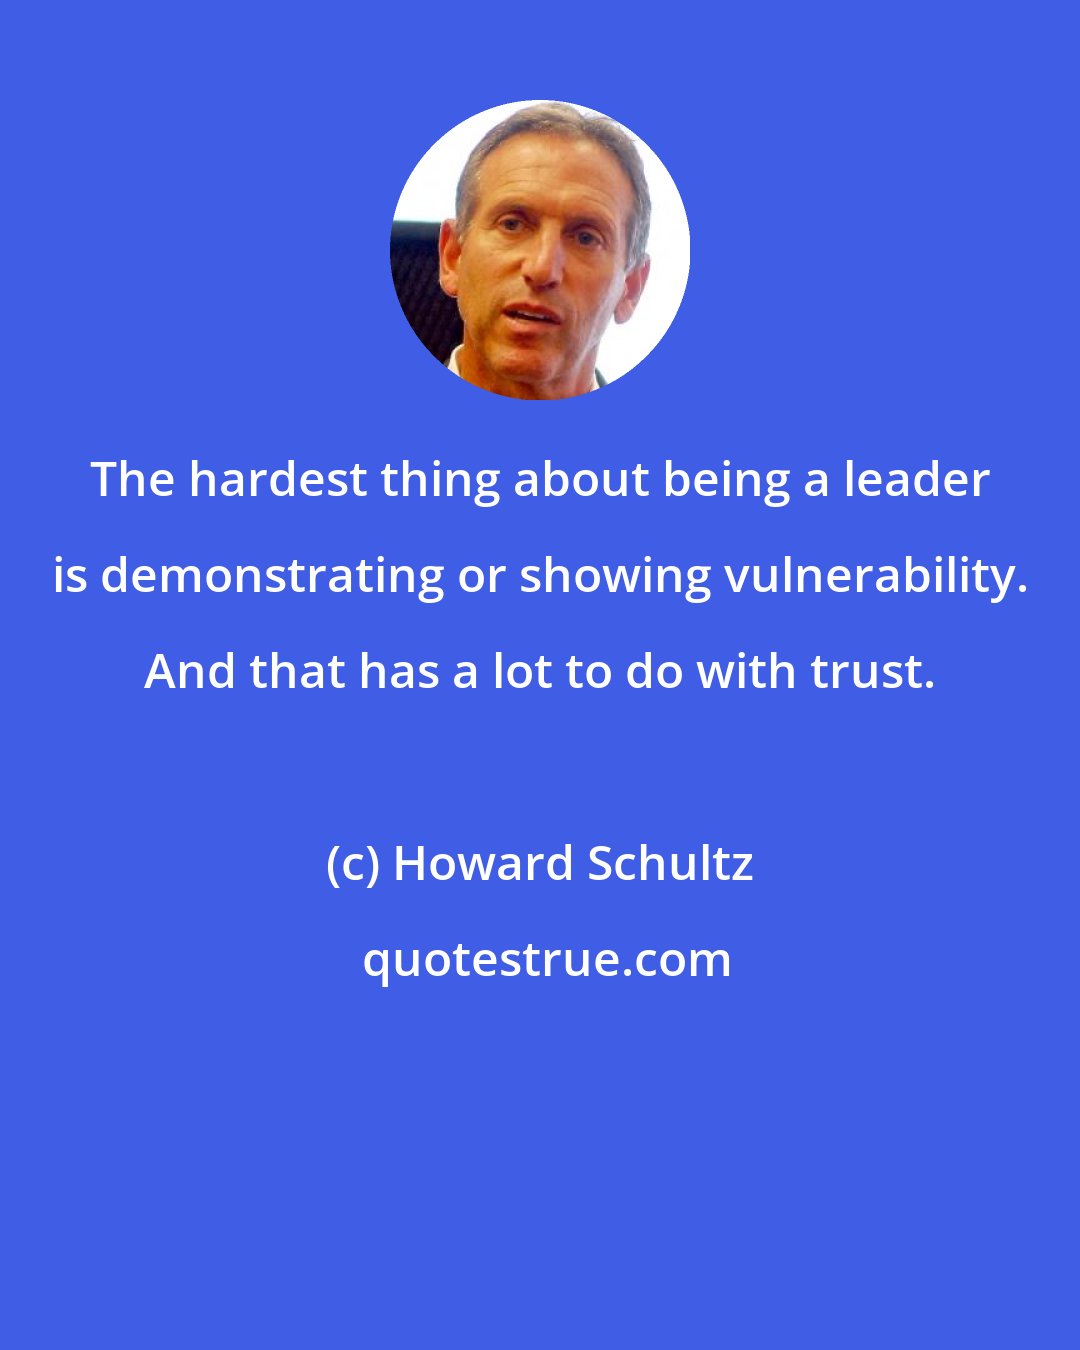 Howard Schultz: The hardest thing about being a leader is demonstrating or showing vulnerability. And that has a lot to do with trust.